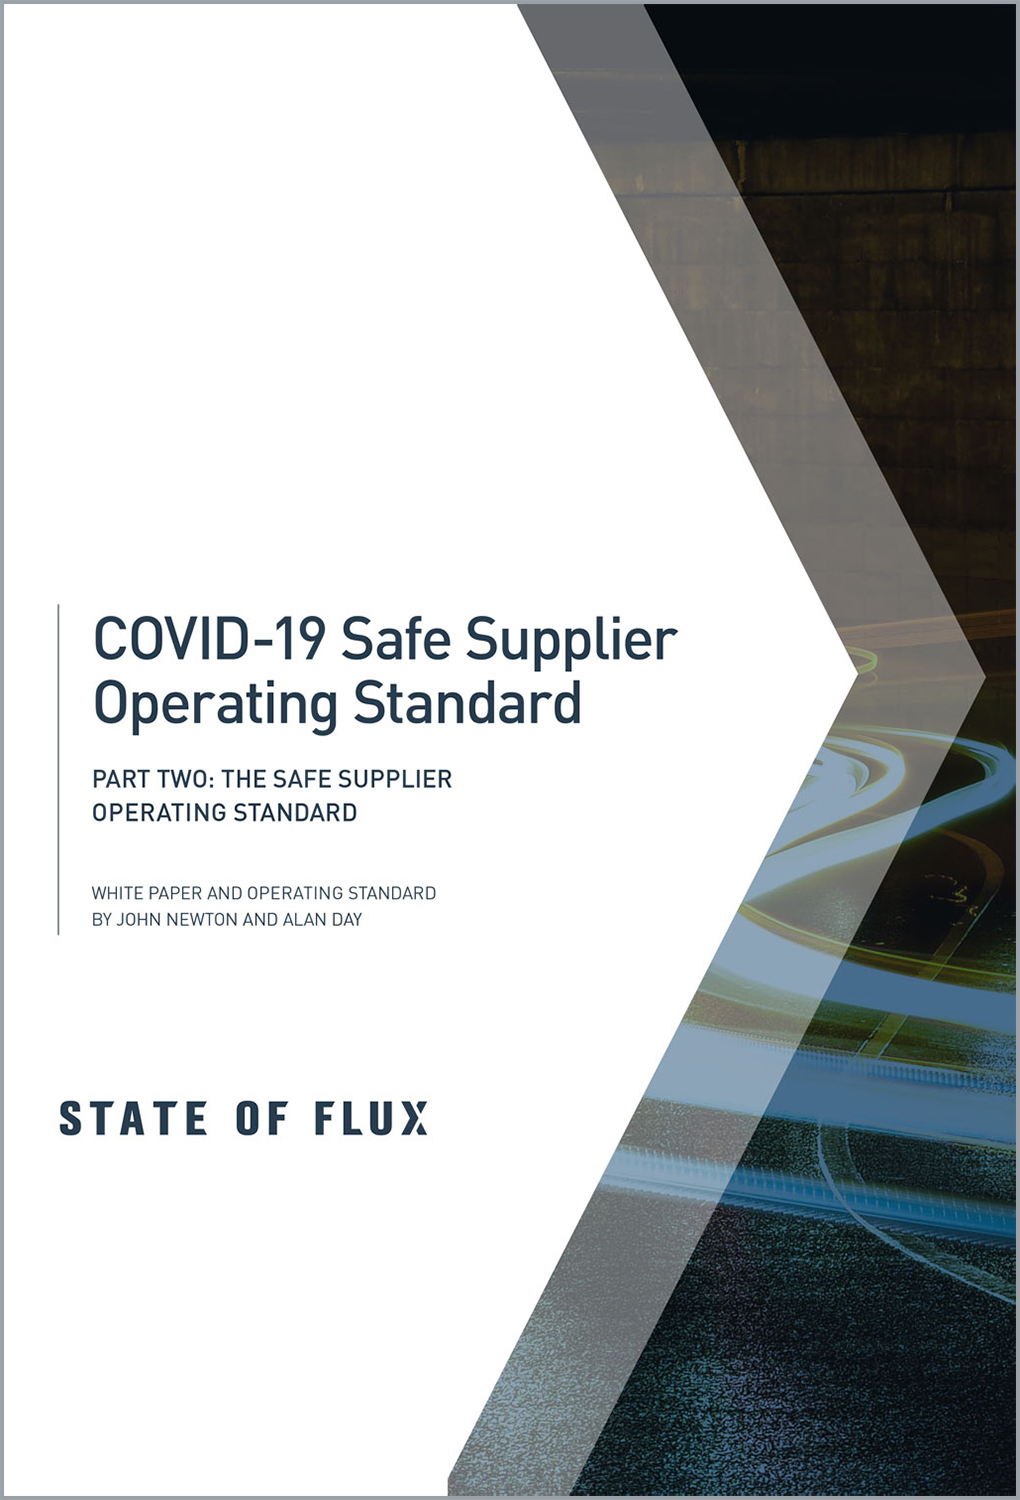 COVID-19 Safe Supplier Operating Standard - Part Two